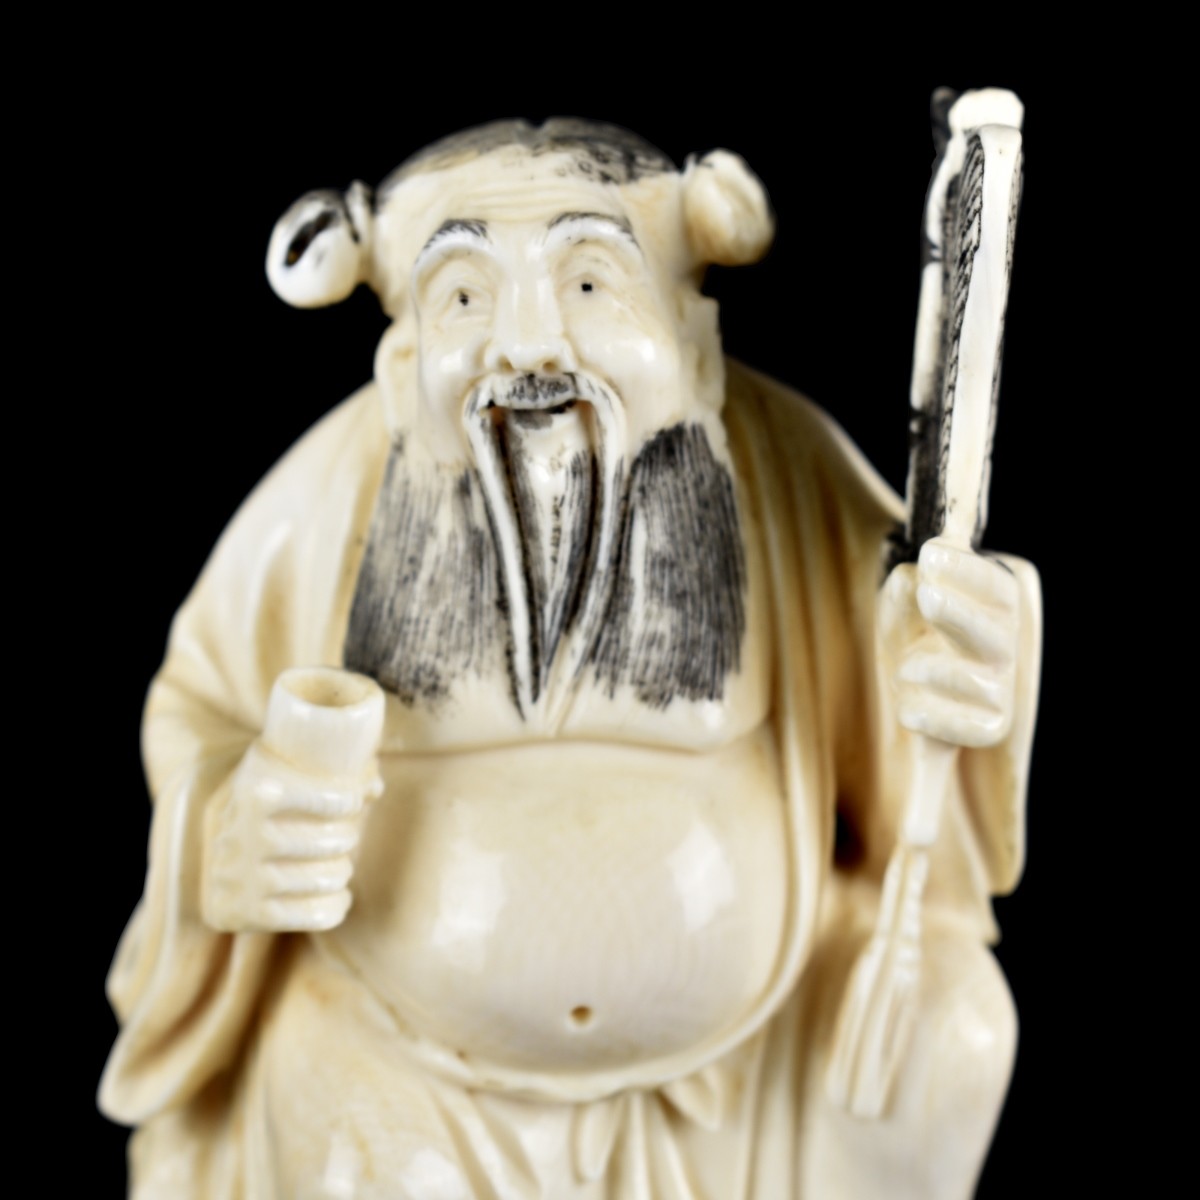 Chinese Carved Seated Figurine